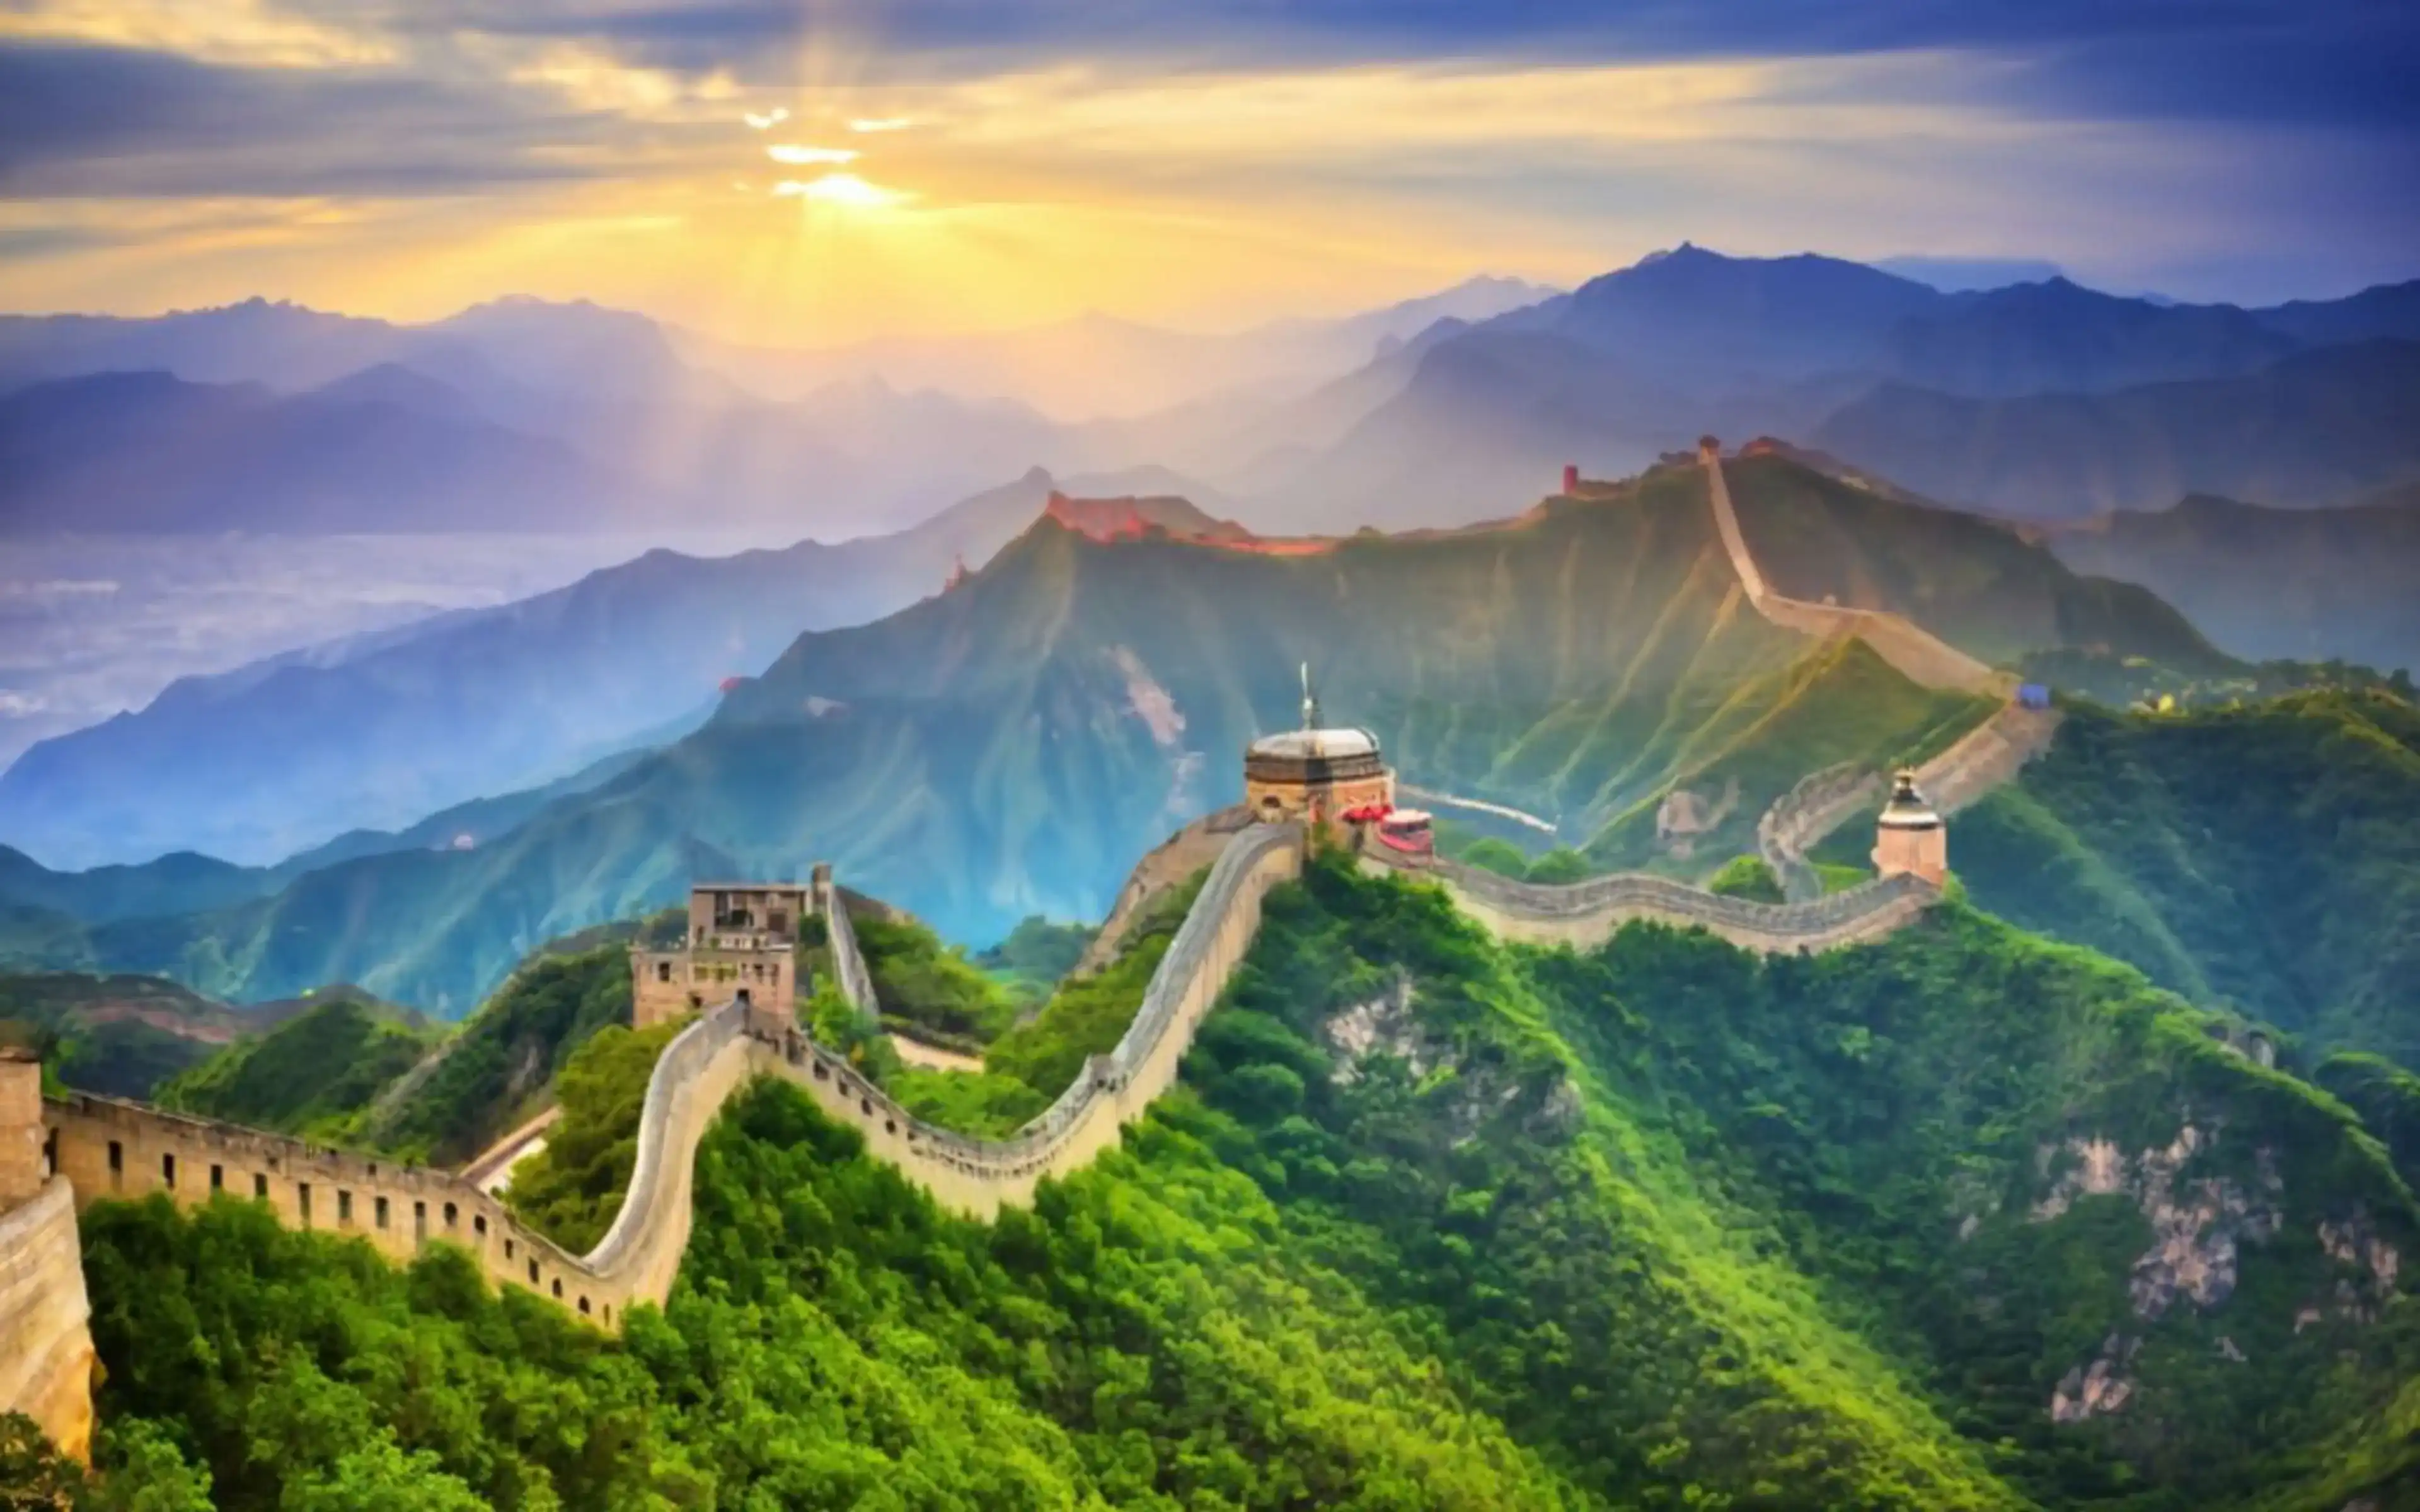 Landscape in China with Great Wall of China